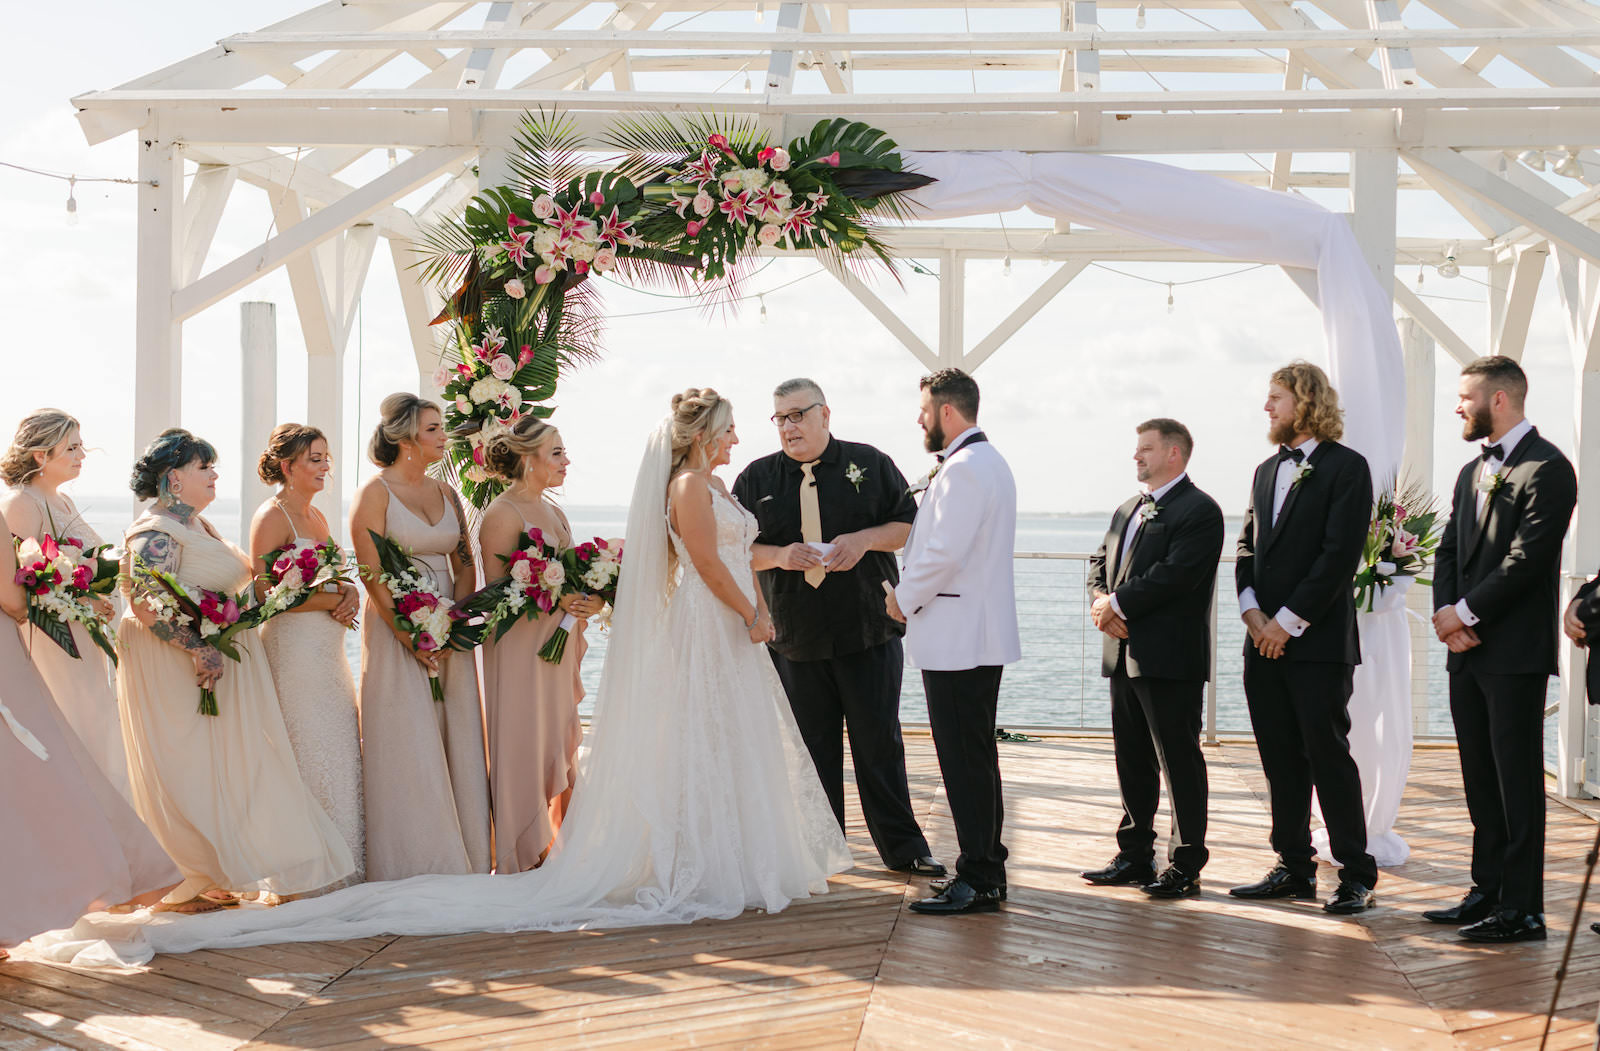 Tropical Modern Bride and Groom Exchanging Vows During Waterfront Wedding Ceremony | Tampa Bay Wedding Venue The Godfrey